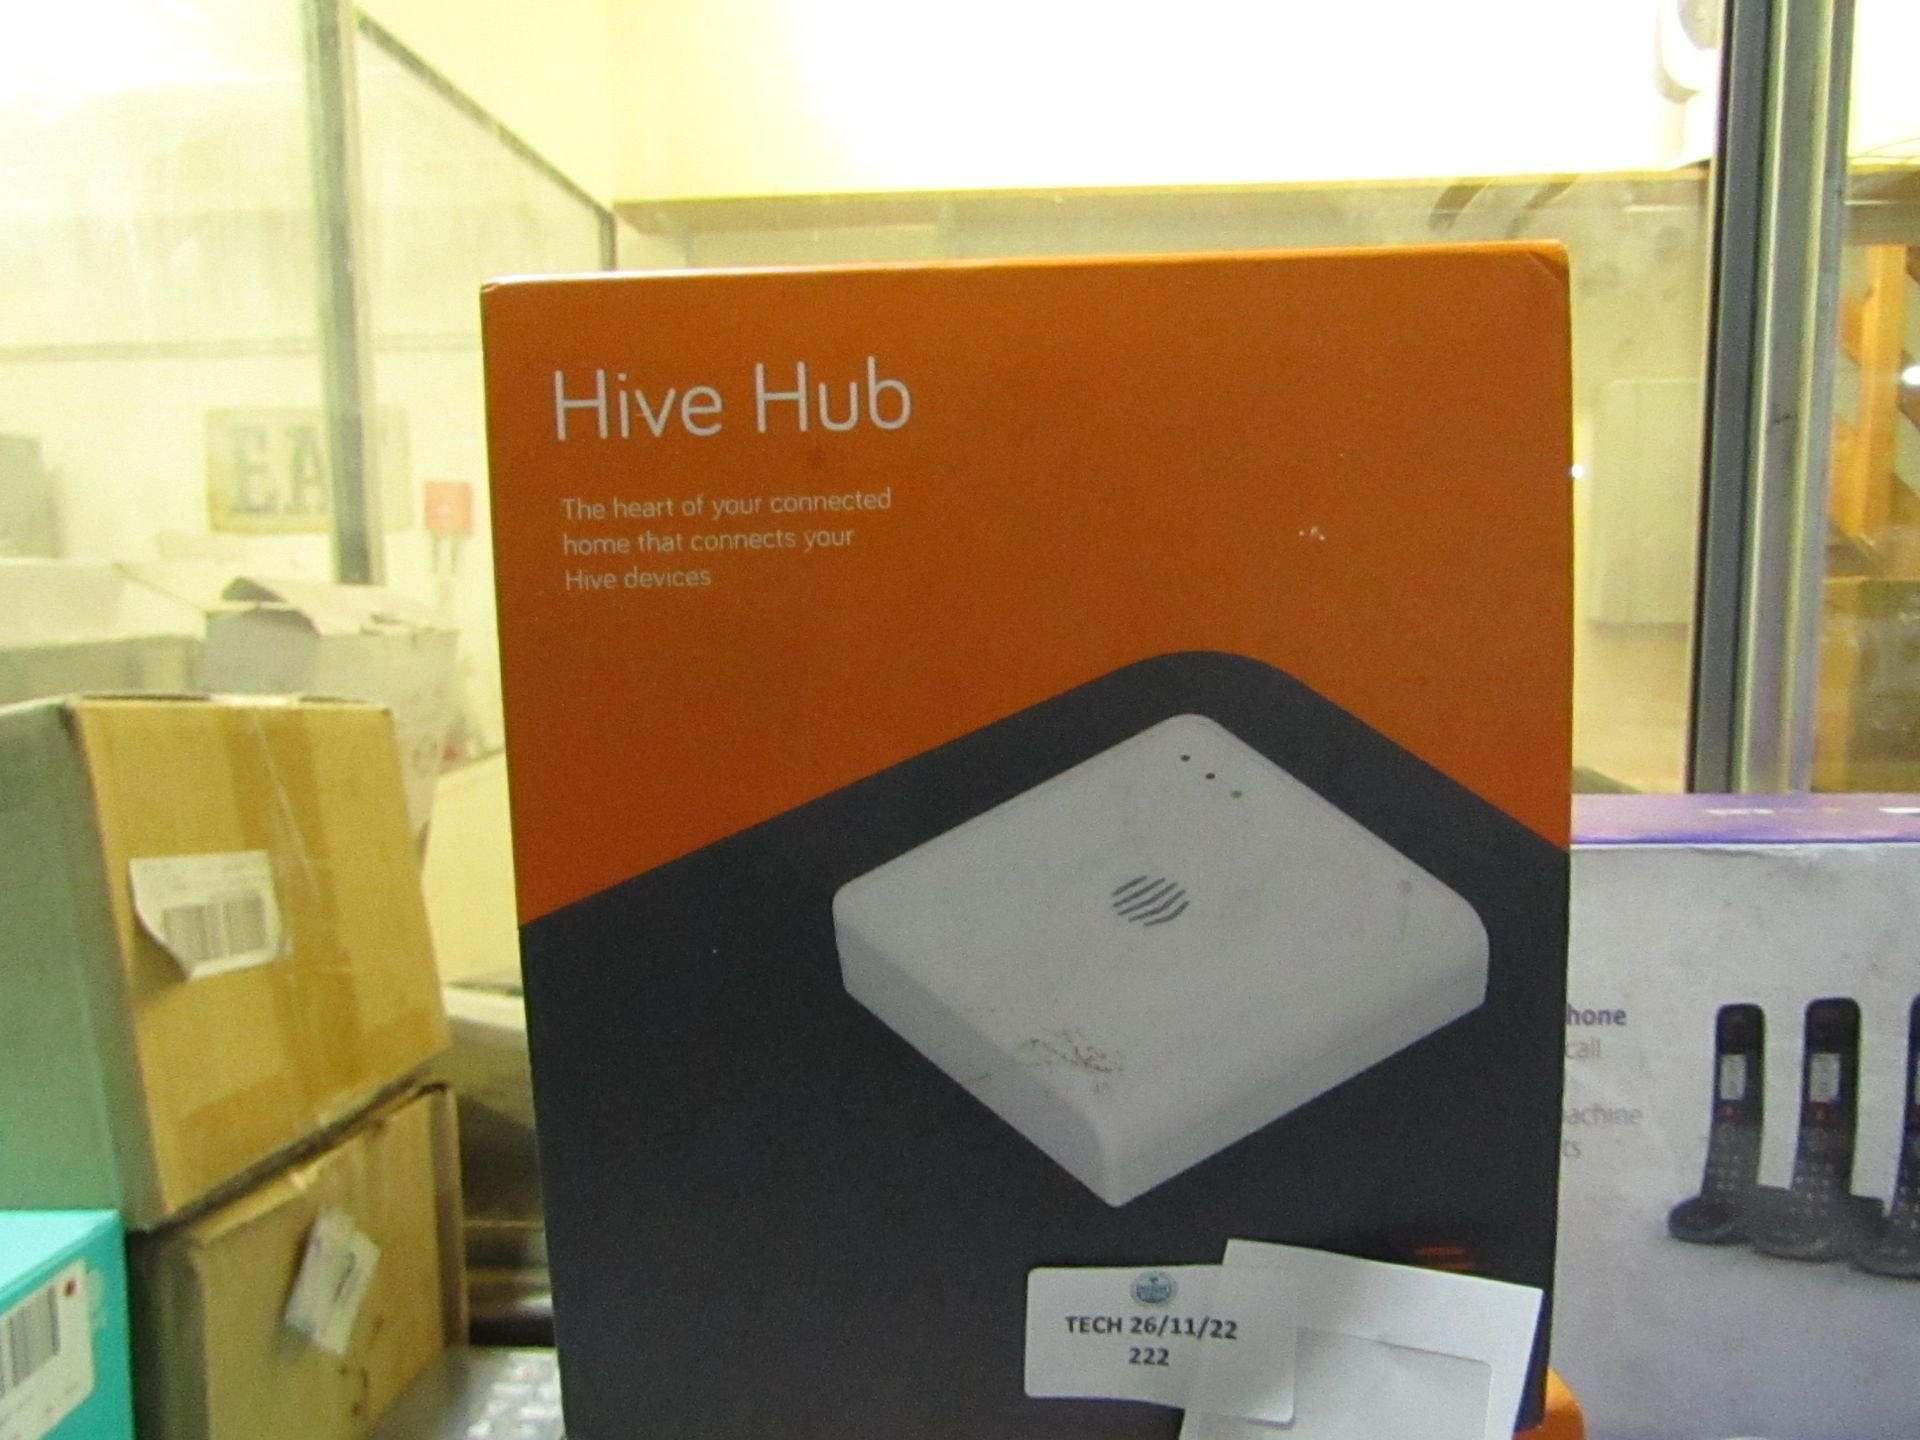 Hive Hub wireless smart home hub, boxed and unchecked